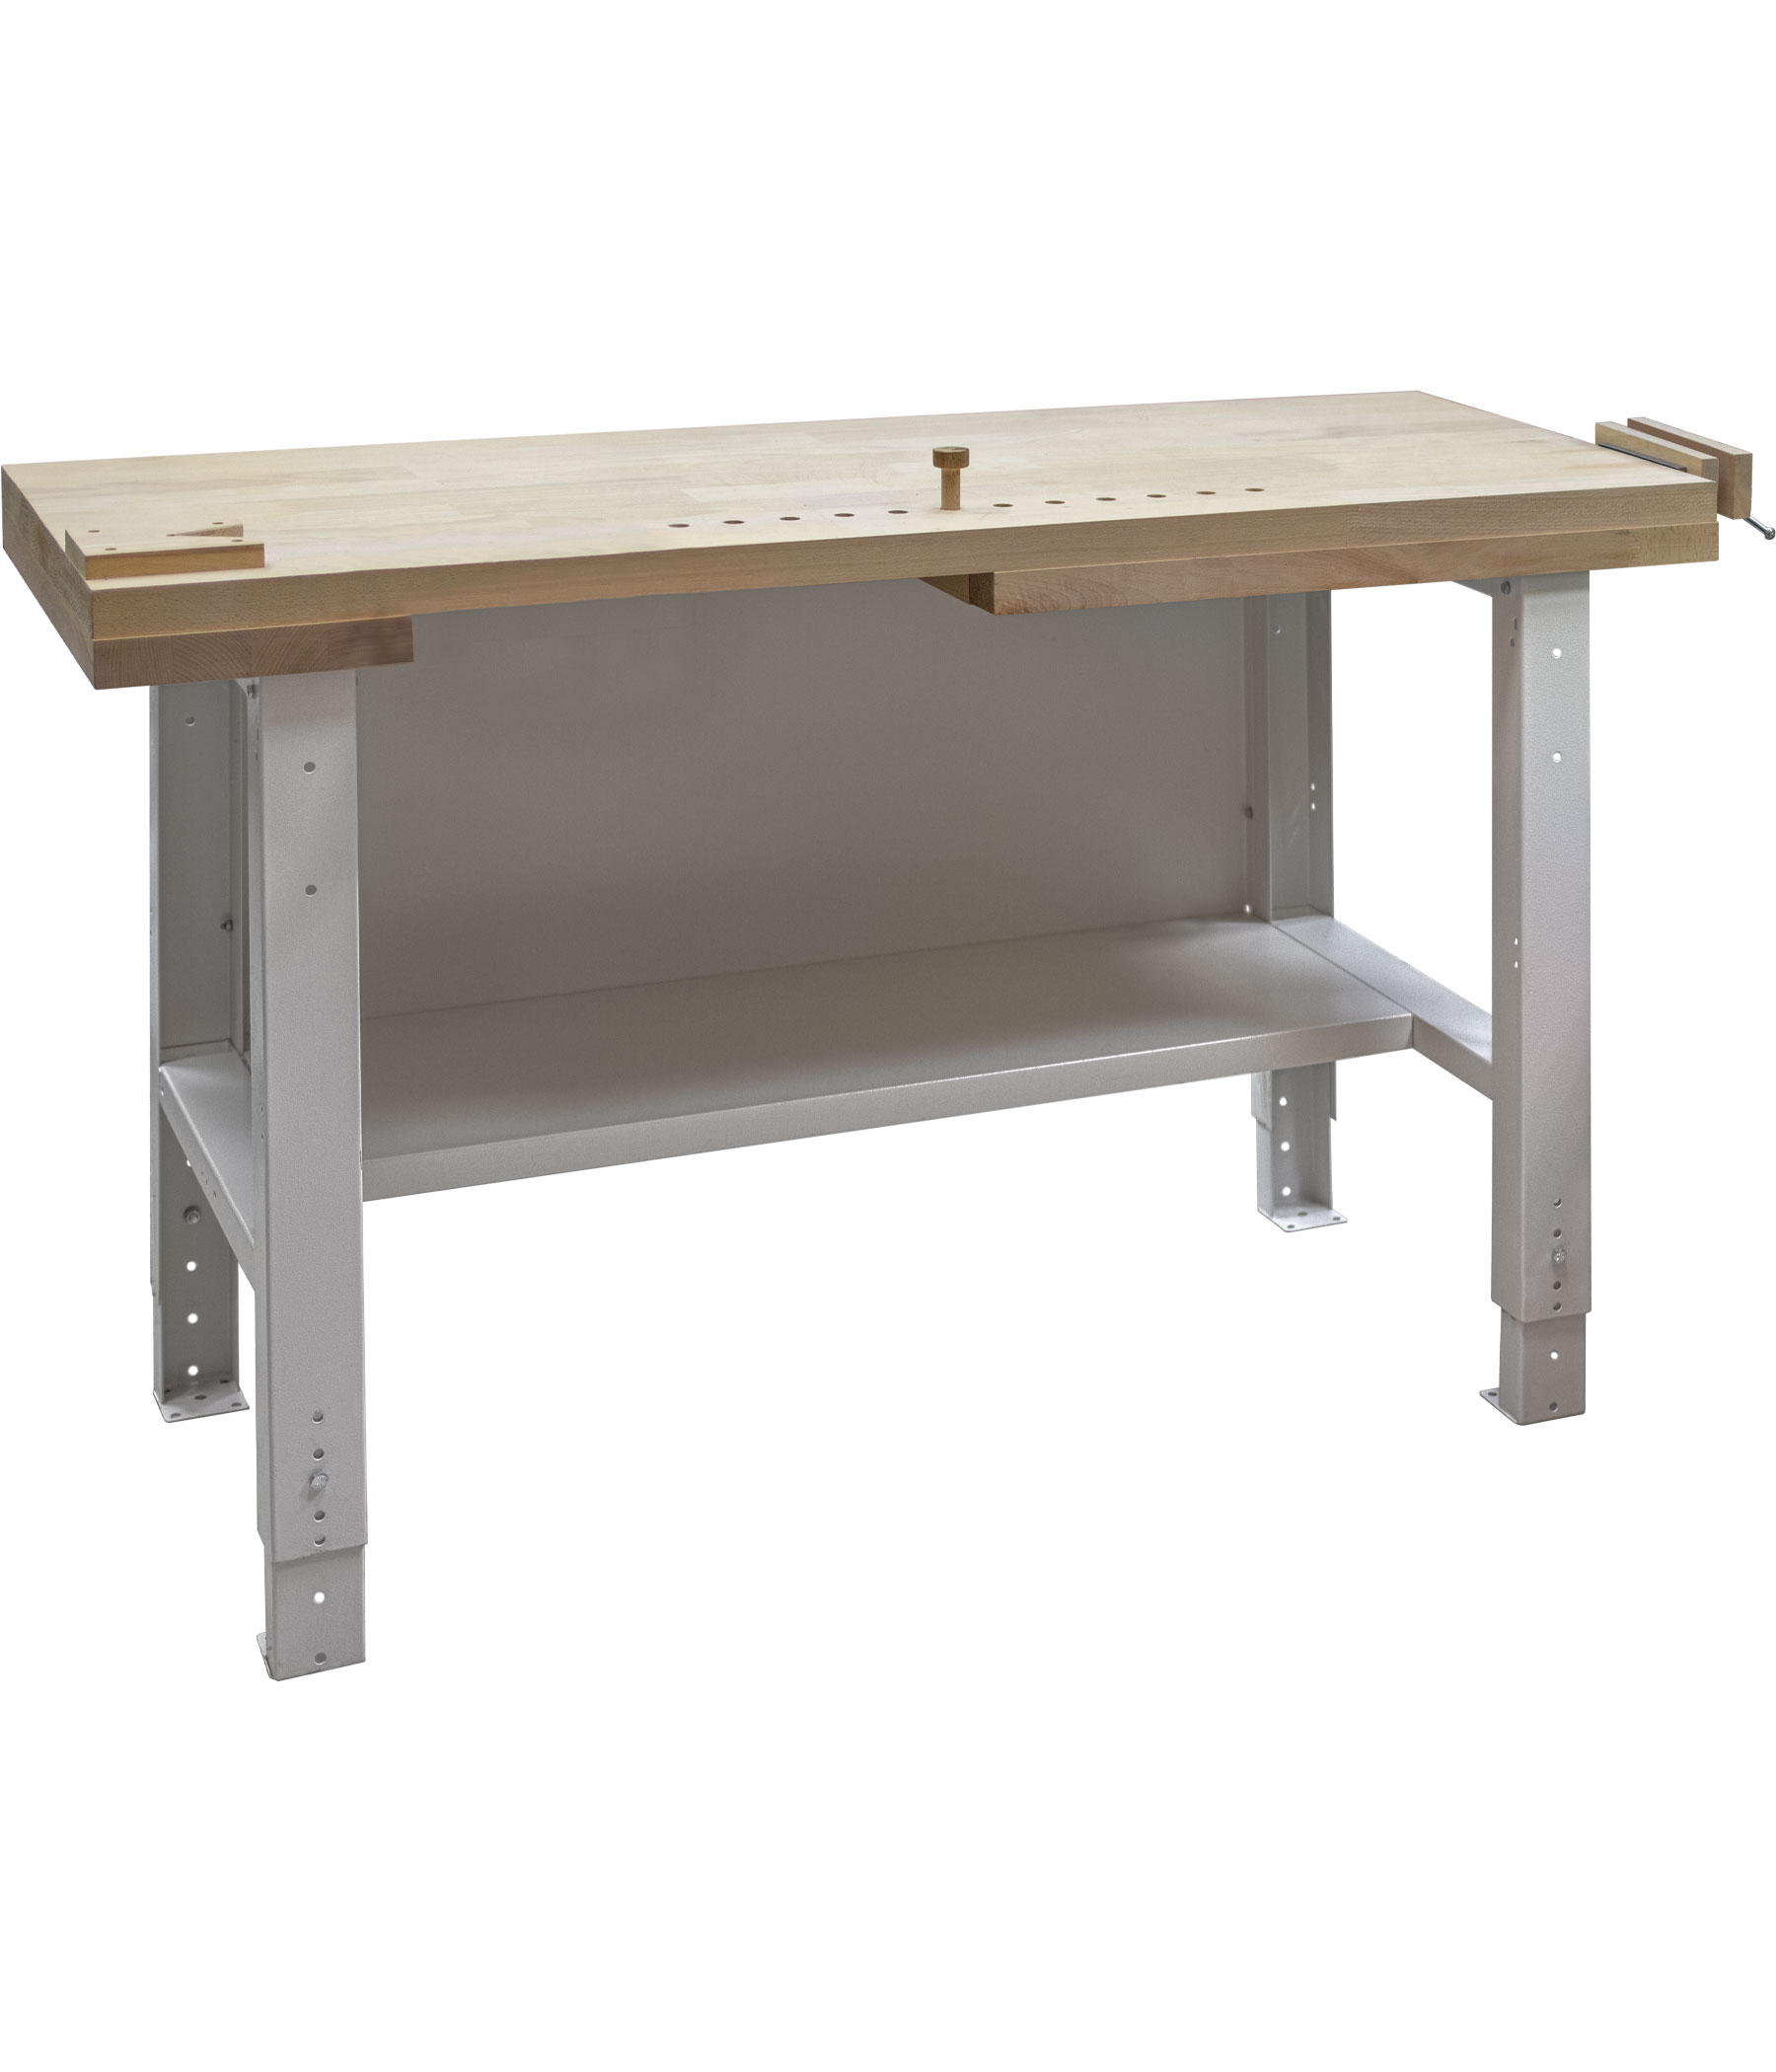 Joiner workbench VS 31 SV with side vice pack